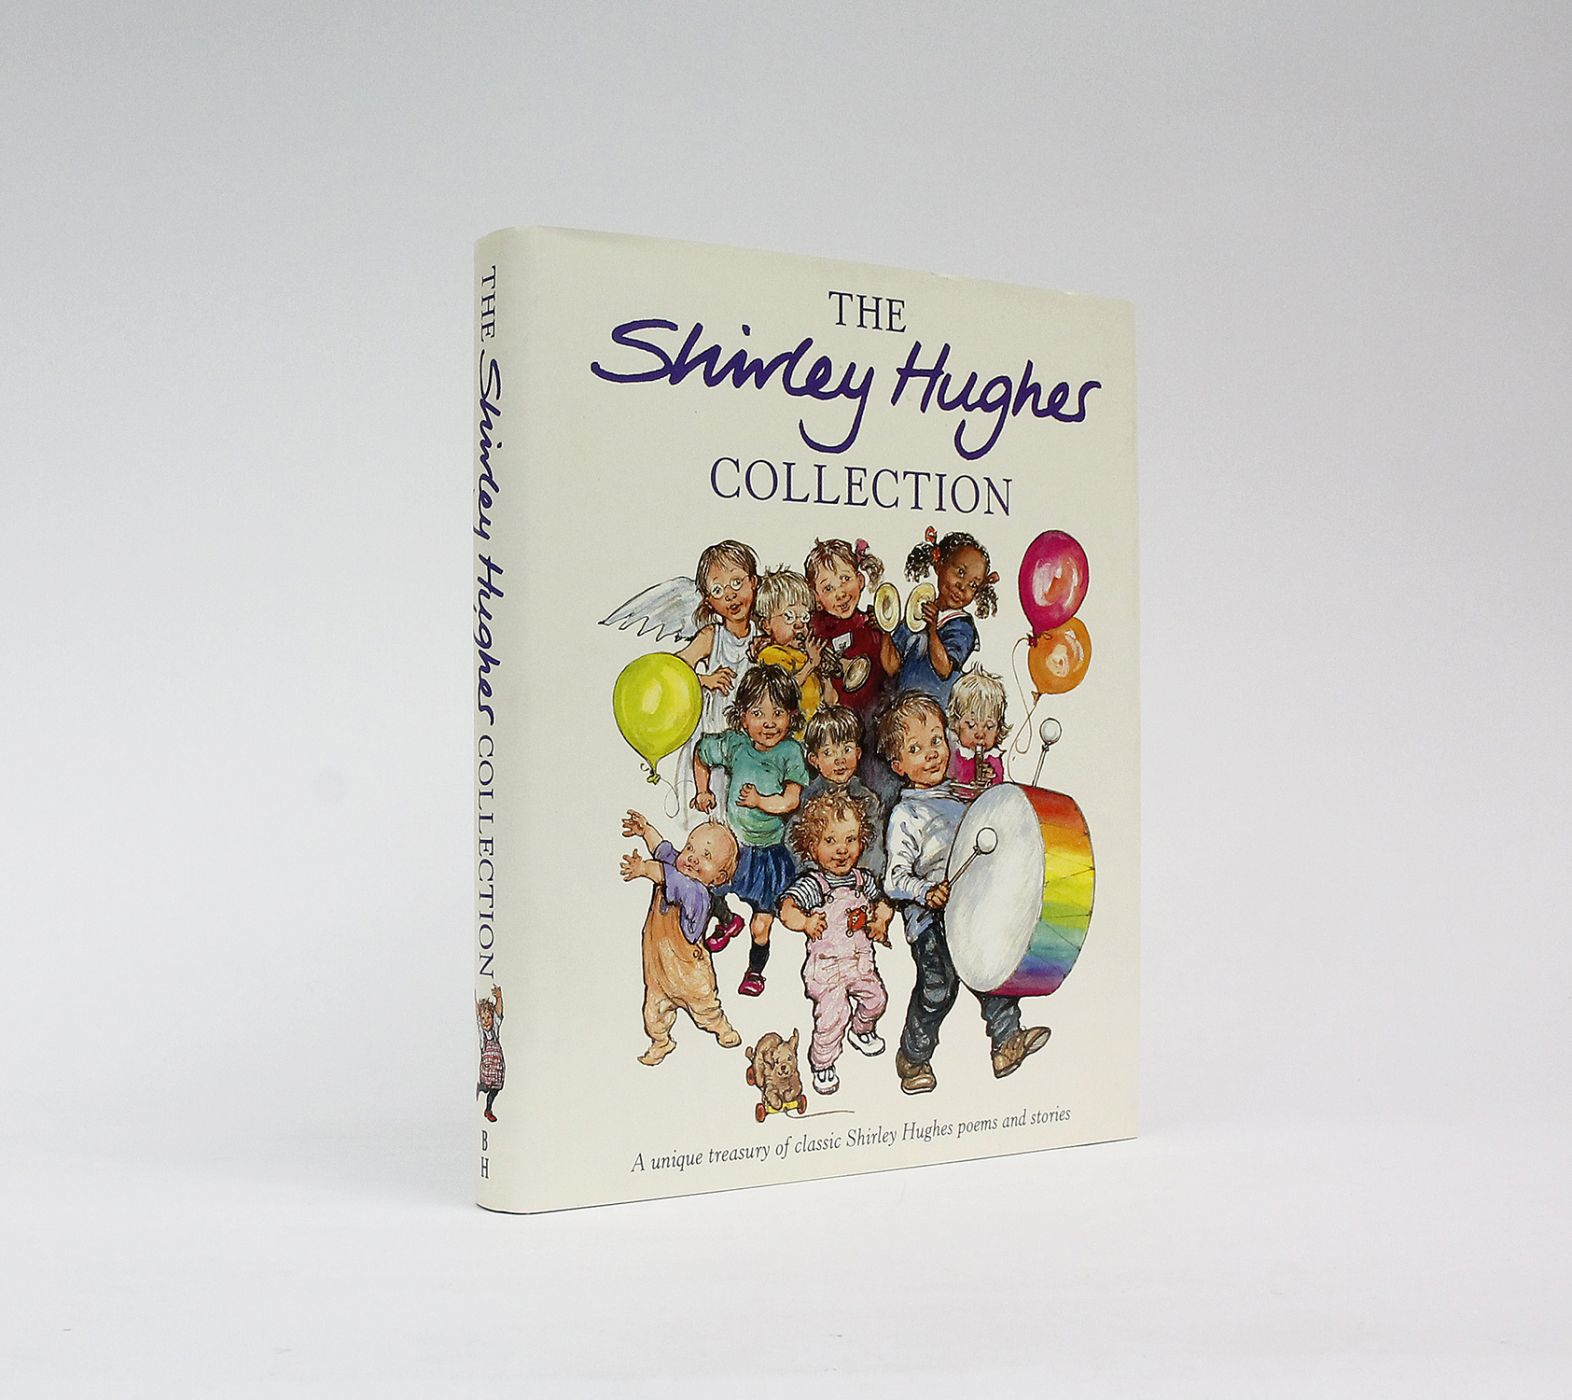 THE SHIRLEY HUGHES COLLECTION -  image 1